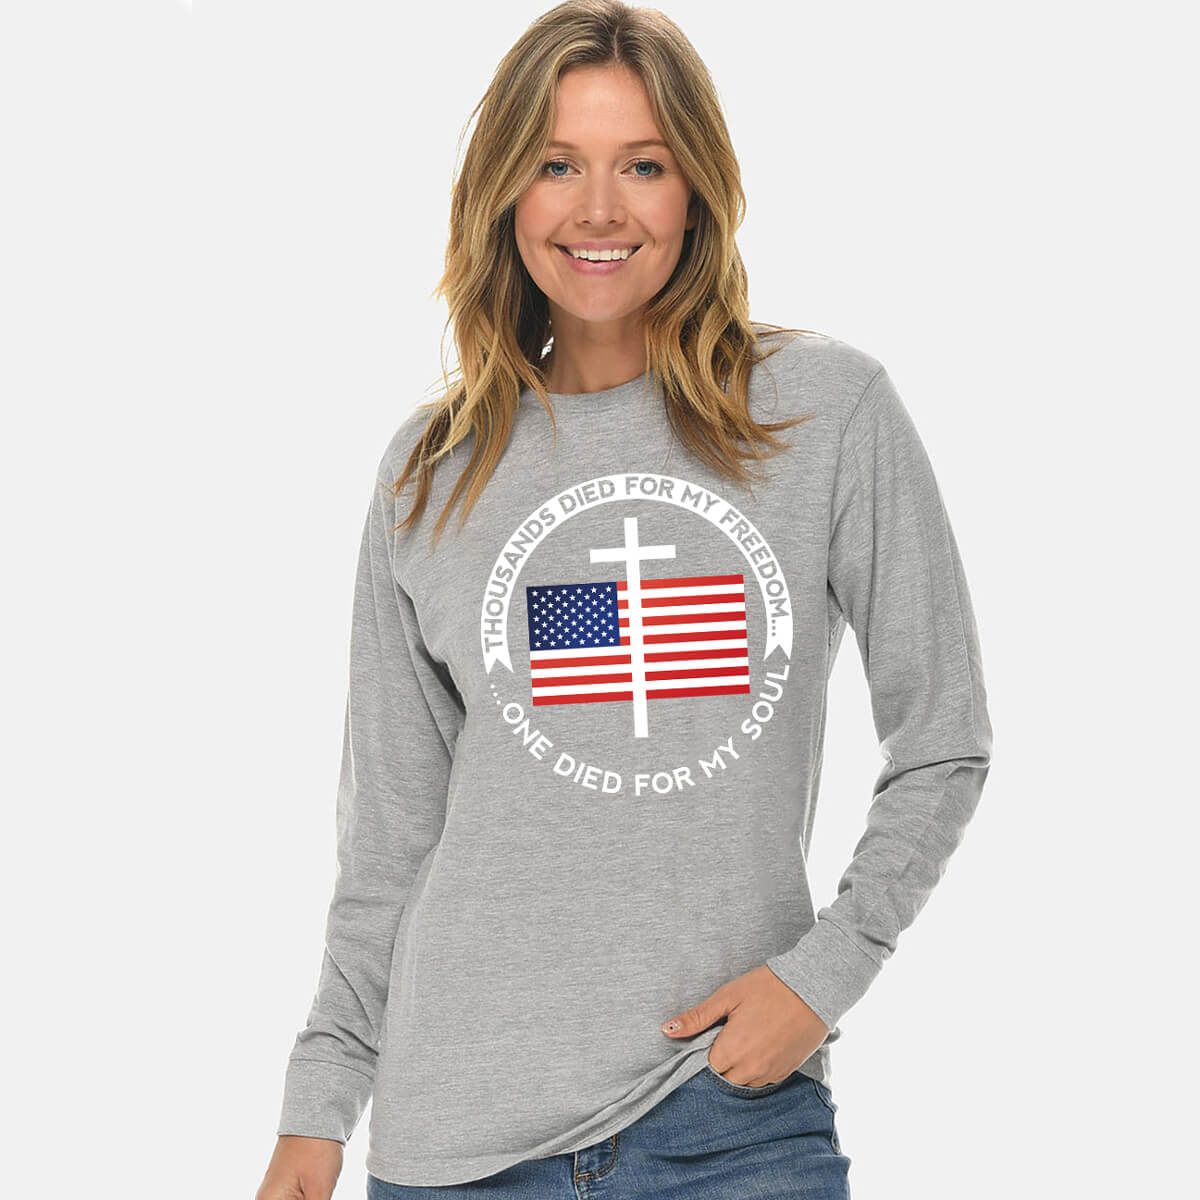 Thousands Died For My Freedom One Died For My Soul Long Sleeve T Shirt